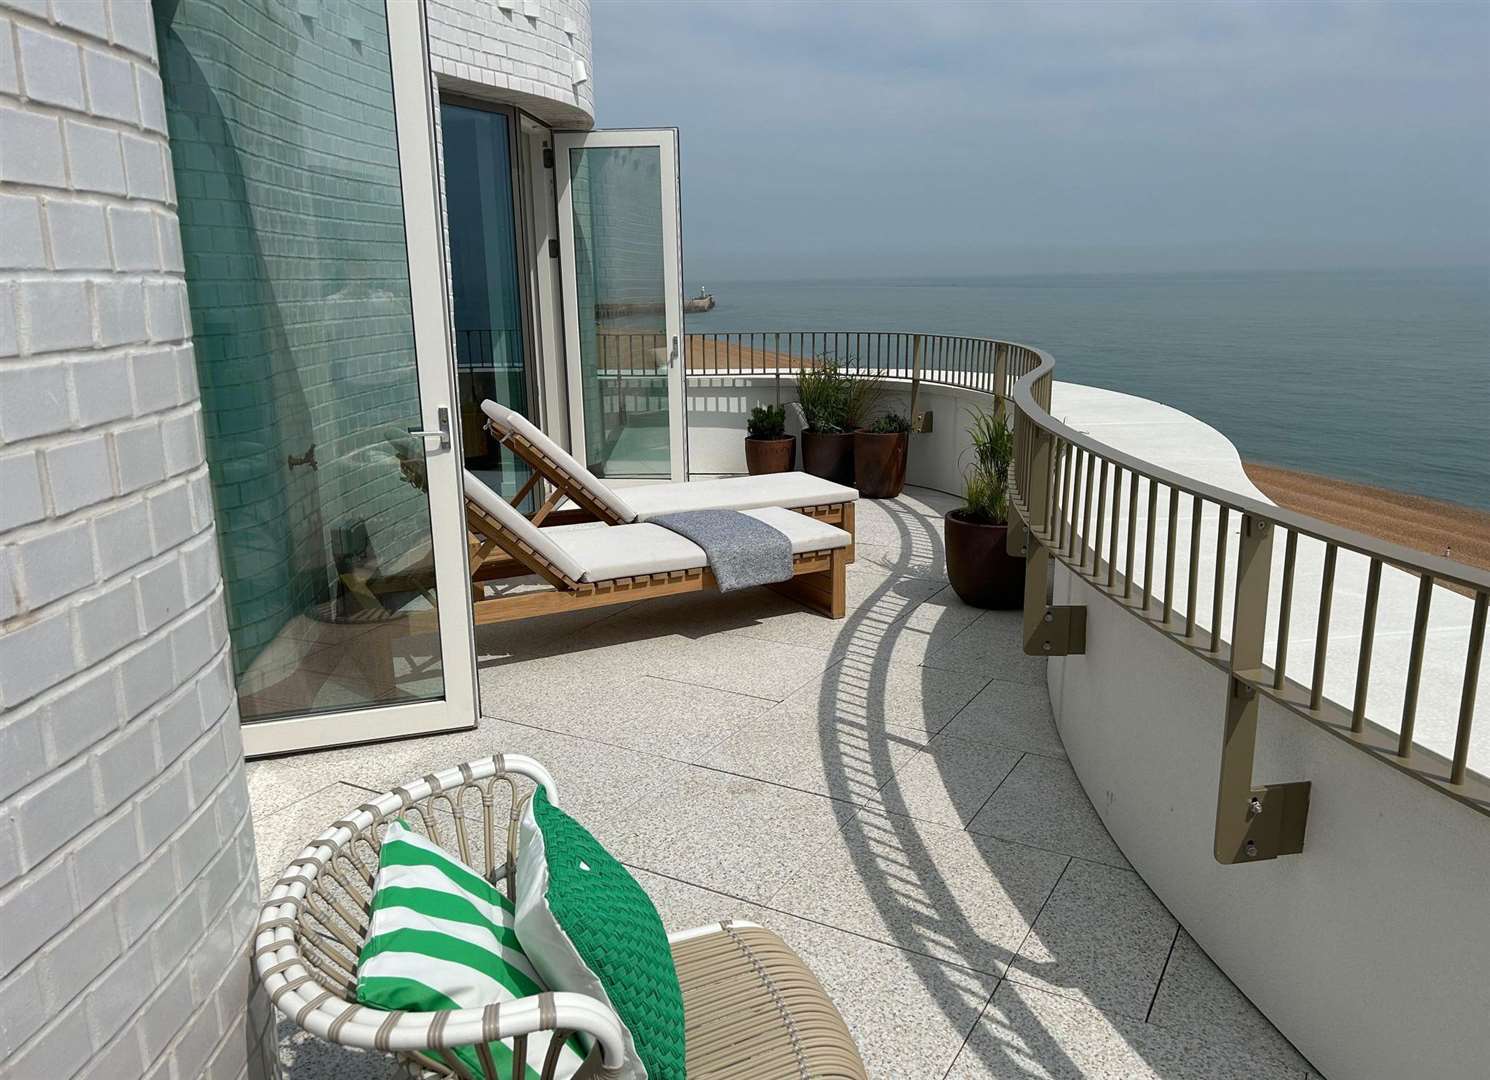 The new homes at Shoreline will offer views over the English Channel